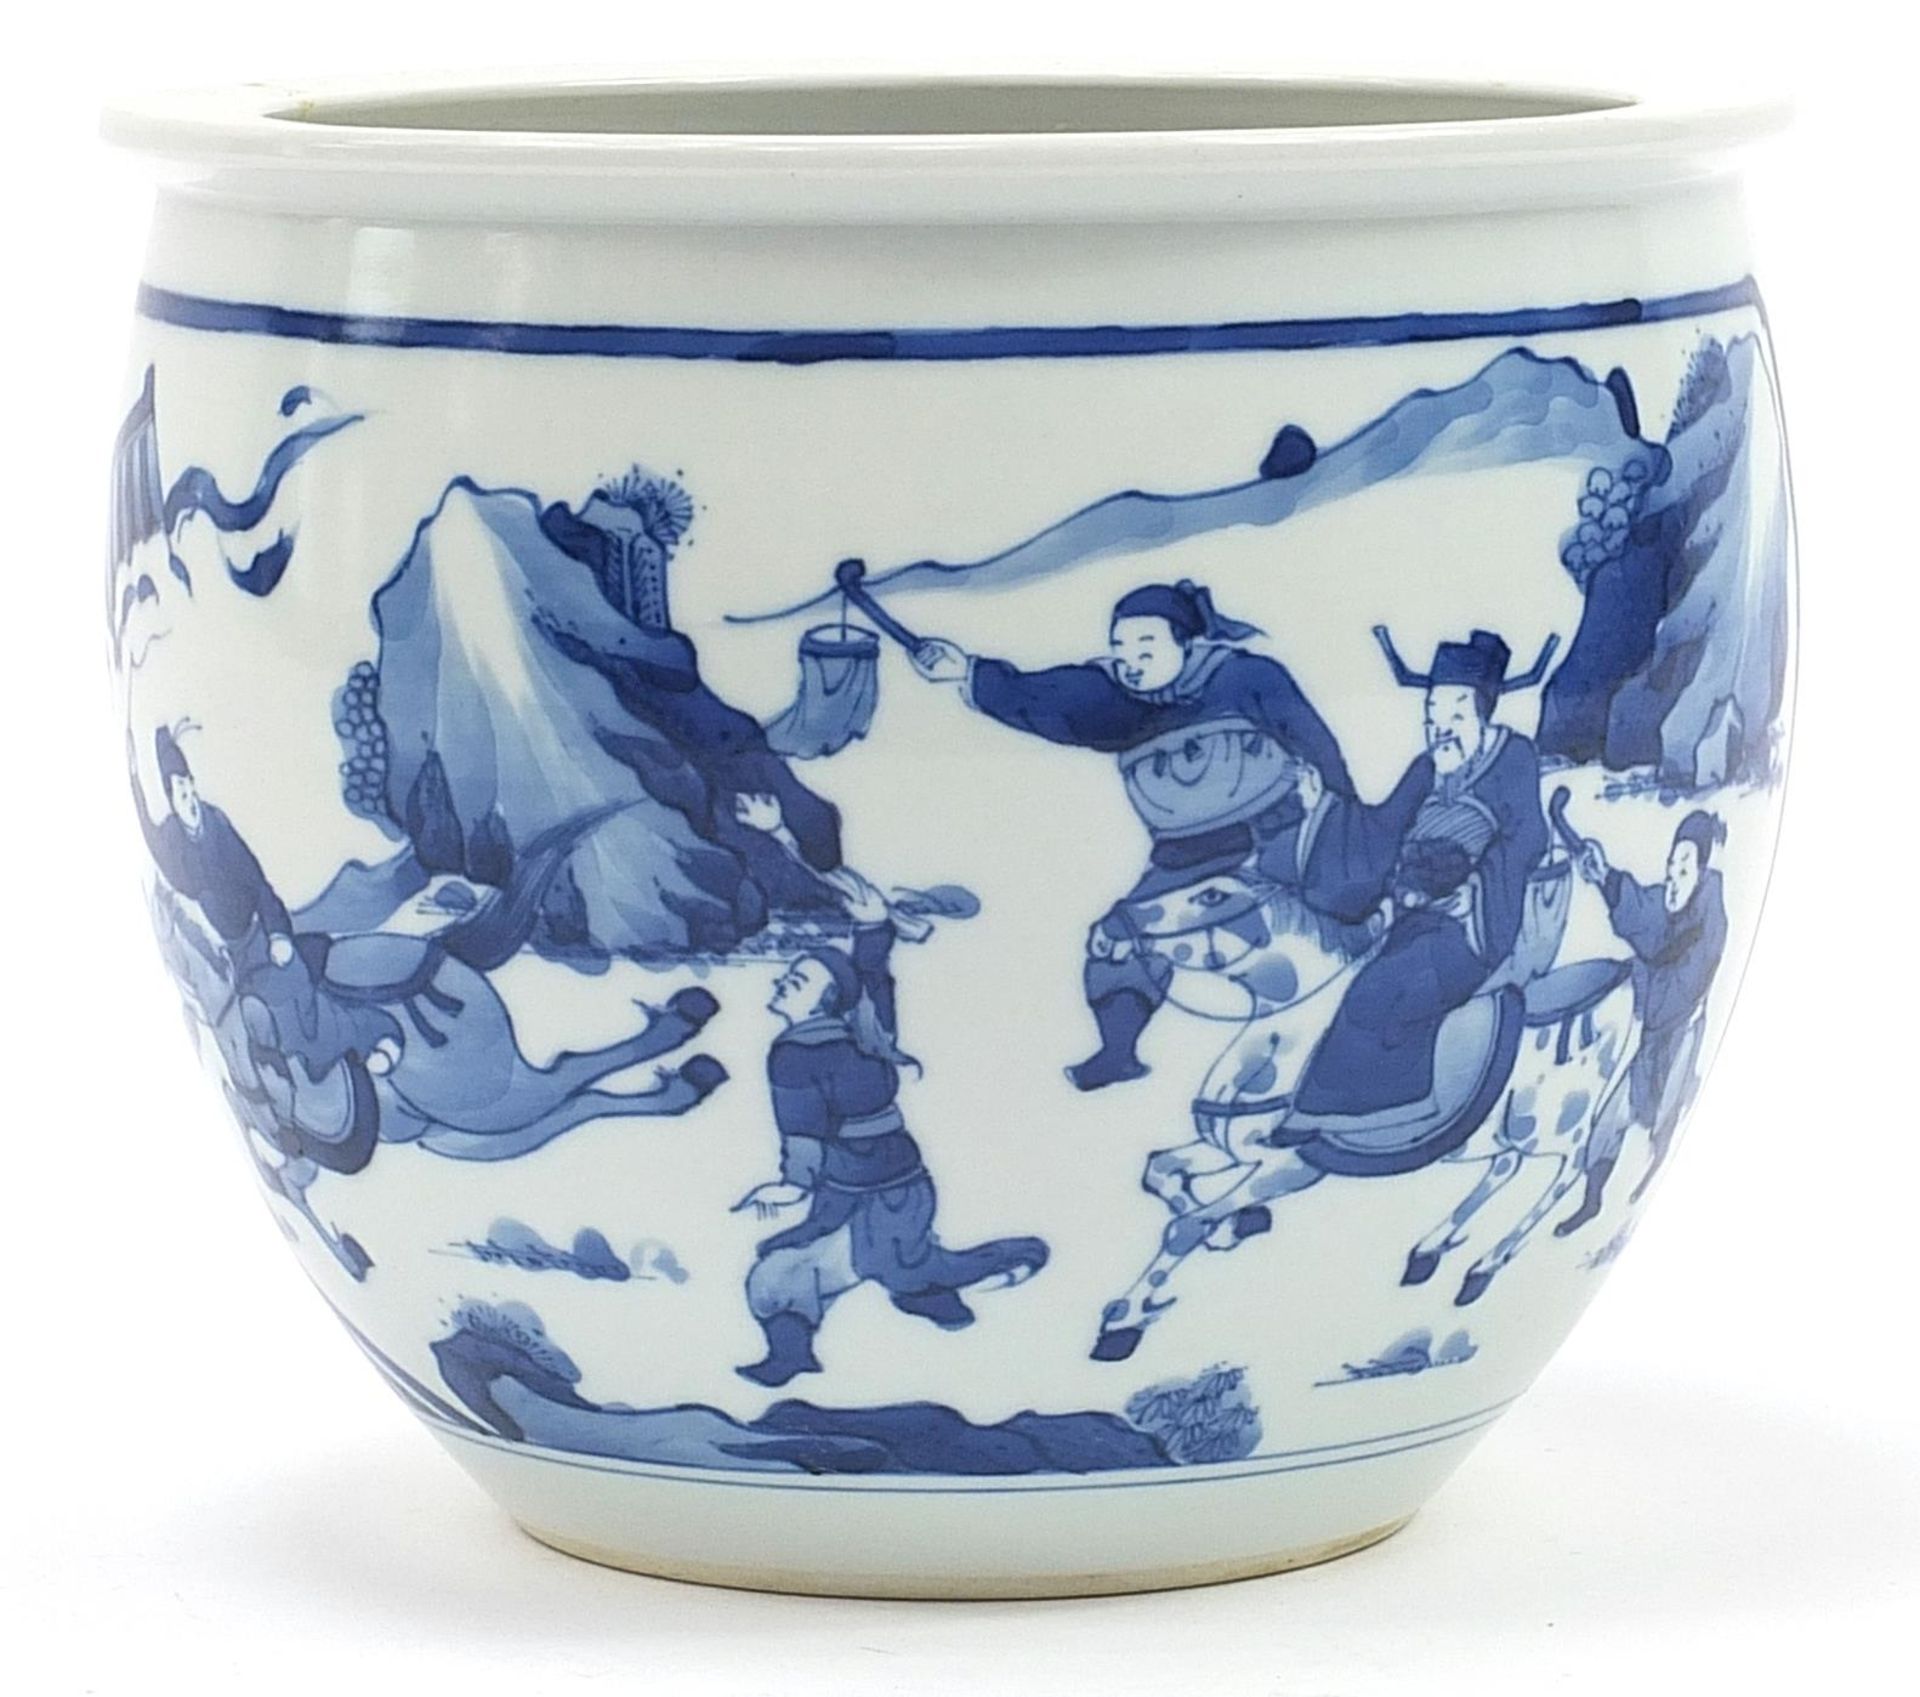 Chinese blue and white porcelain jardiniere hand painted with warriors and emperors on horseback